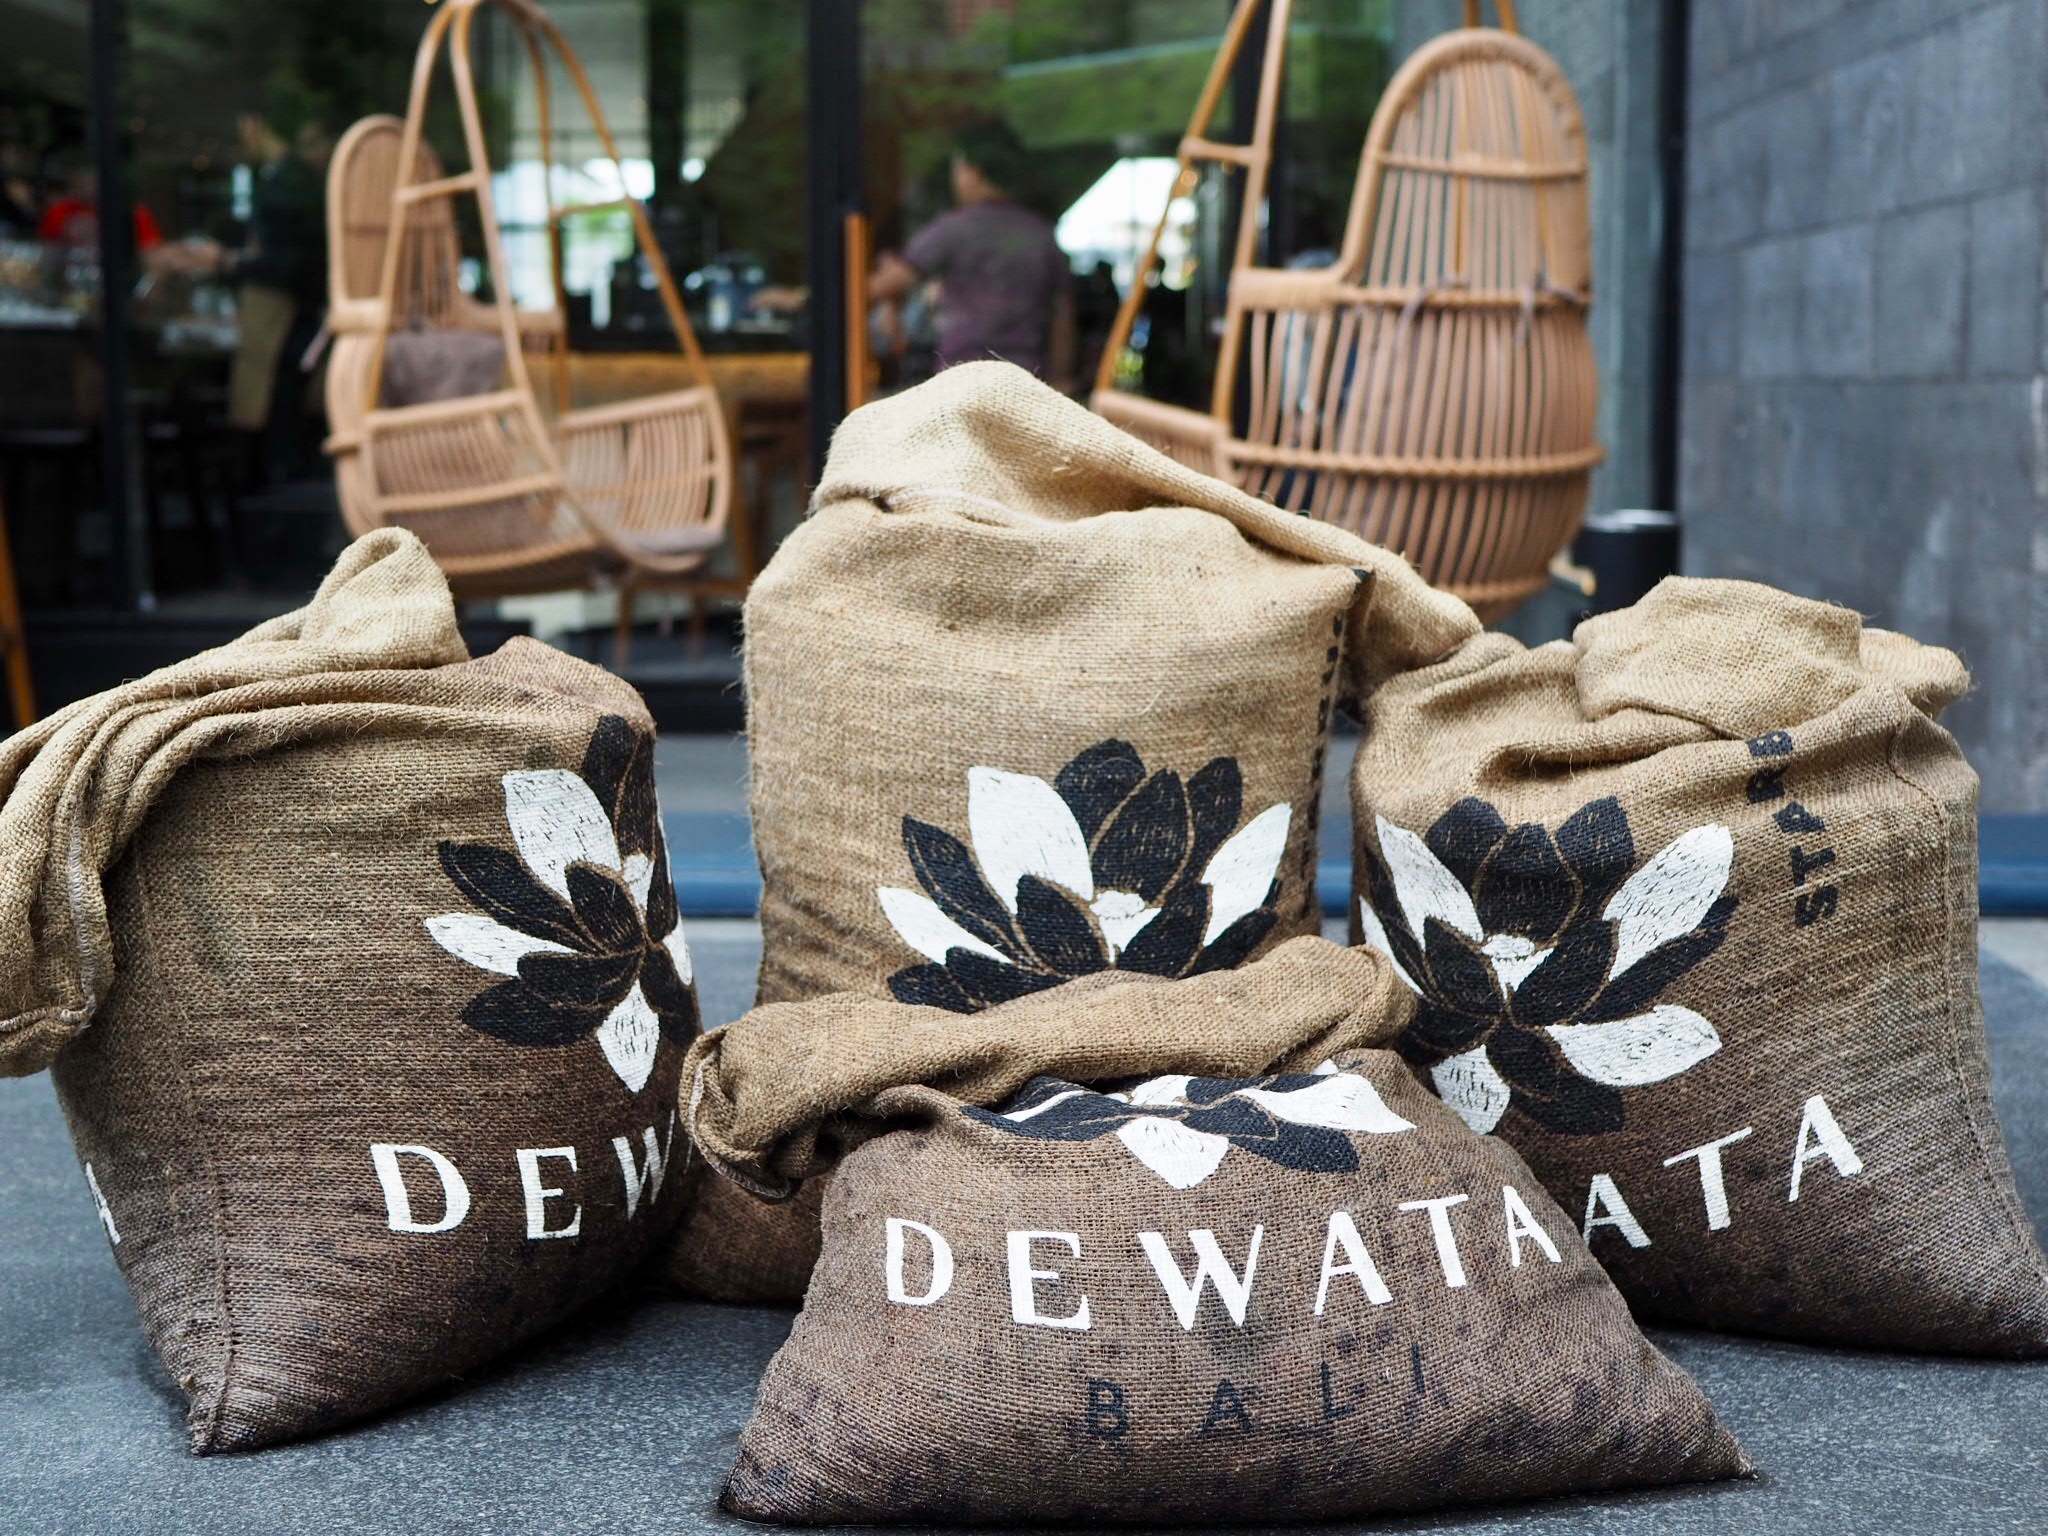 Rustic-look burlap coffee sacks are scattered around the entrance. Photo: Coconuts Bali